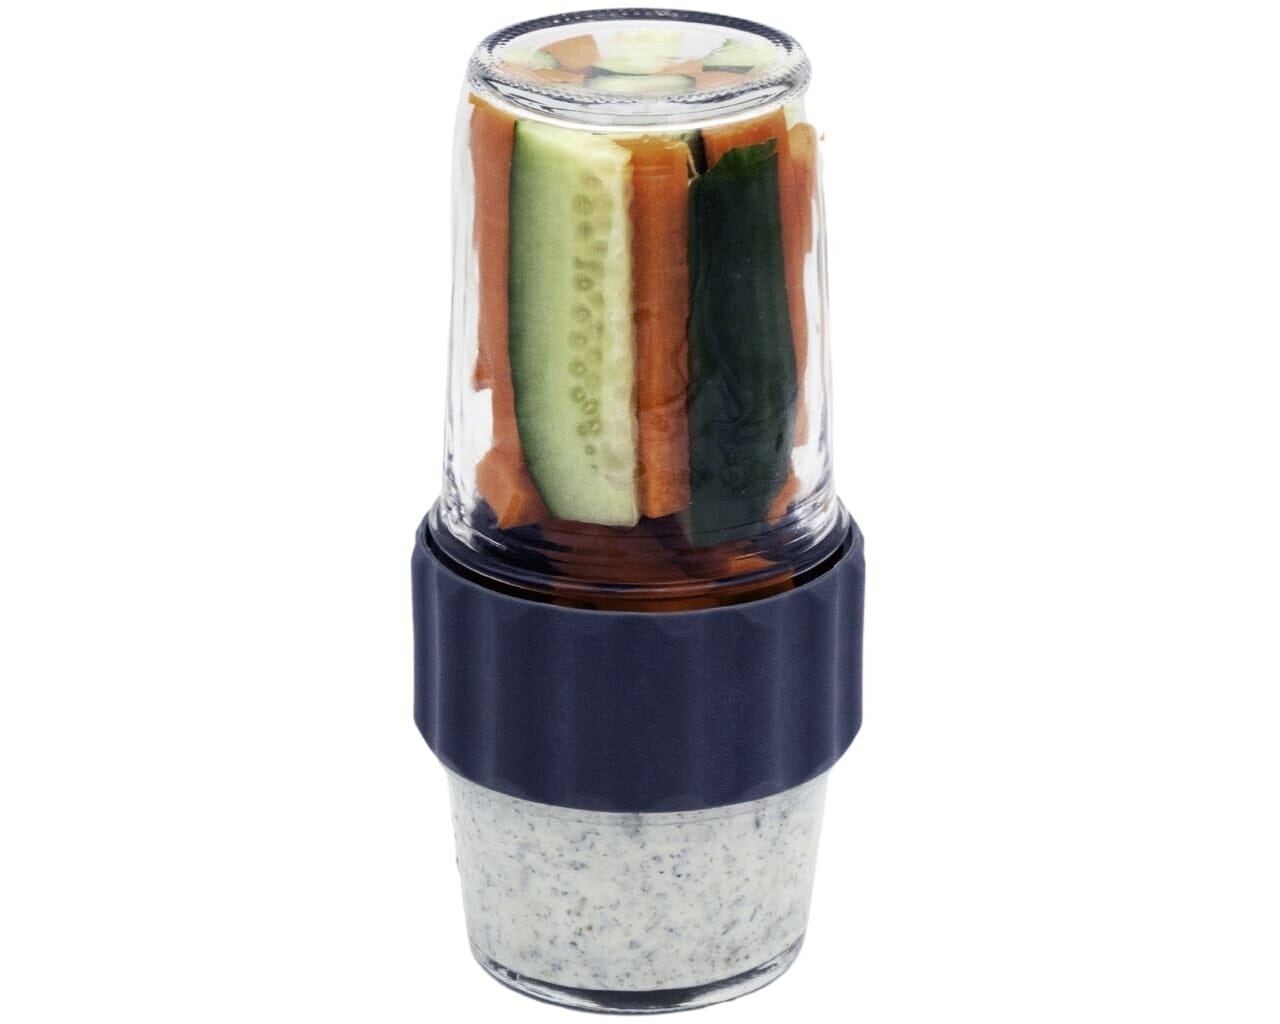 2-in-1-lid-connect-two-regular-mouth-mason-jars-charcoal-gray-silicone-seals-ranch-carrots-cucumbers